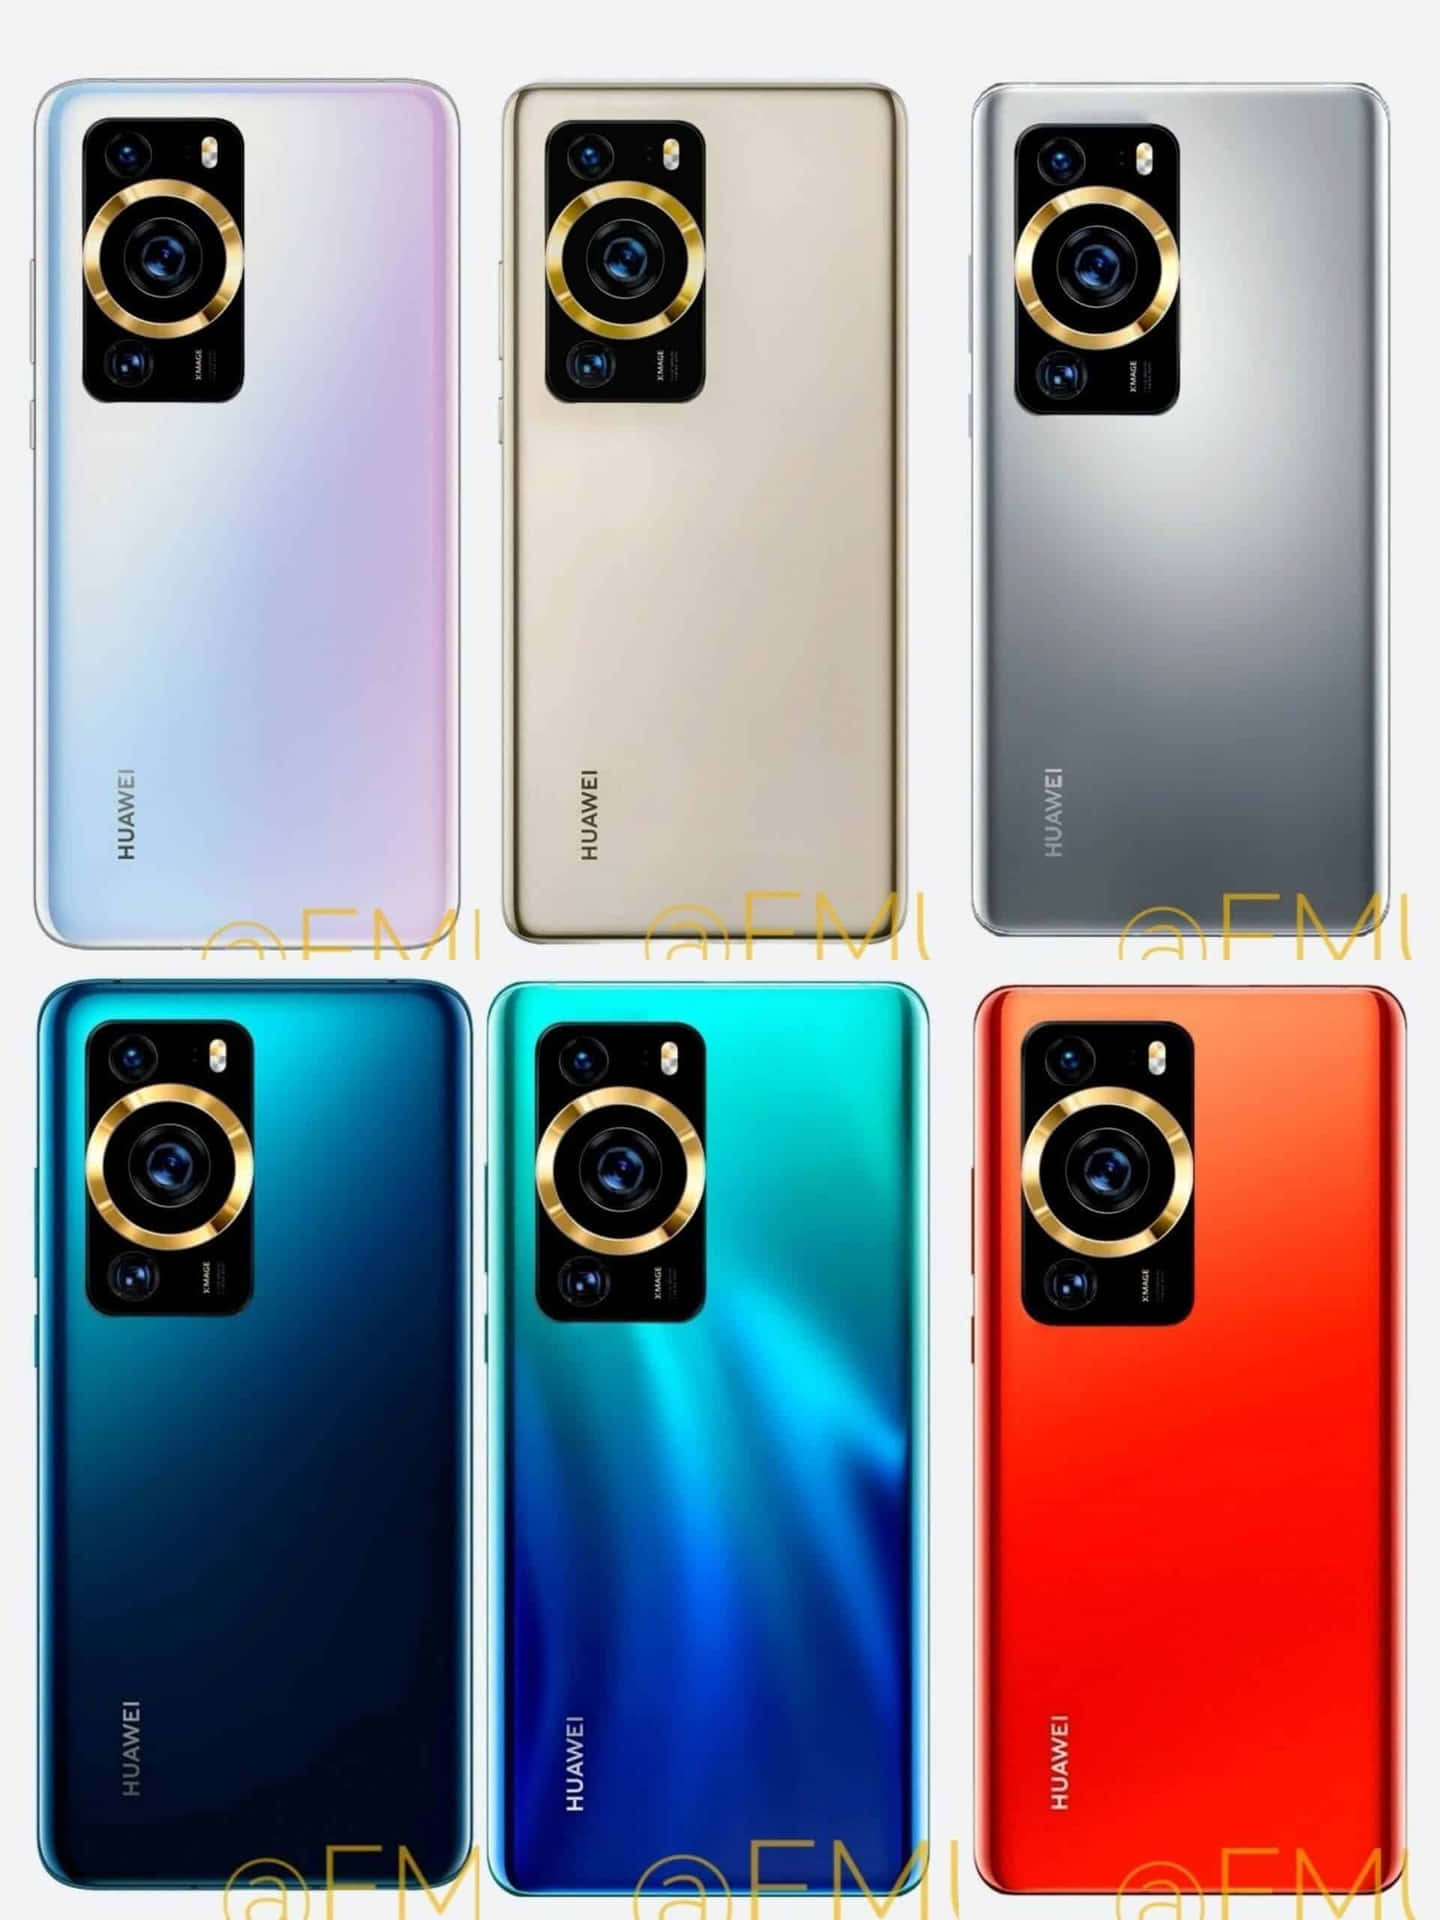 Get the power of Huawei P30 Pro.